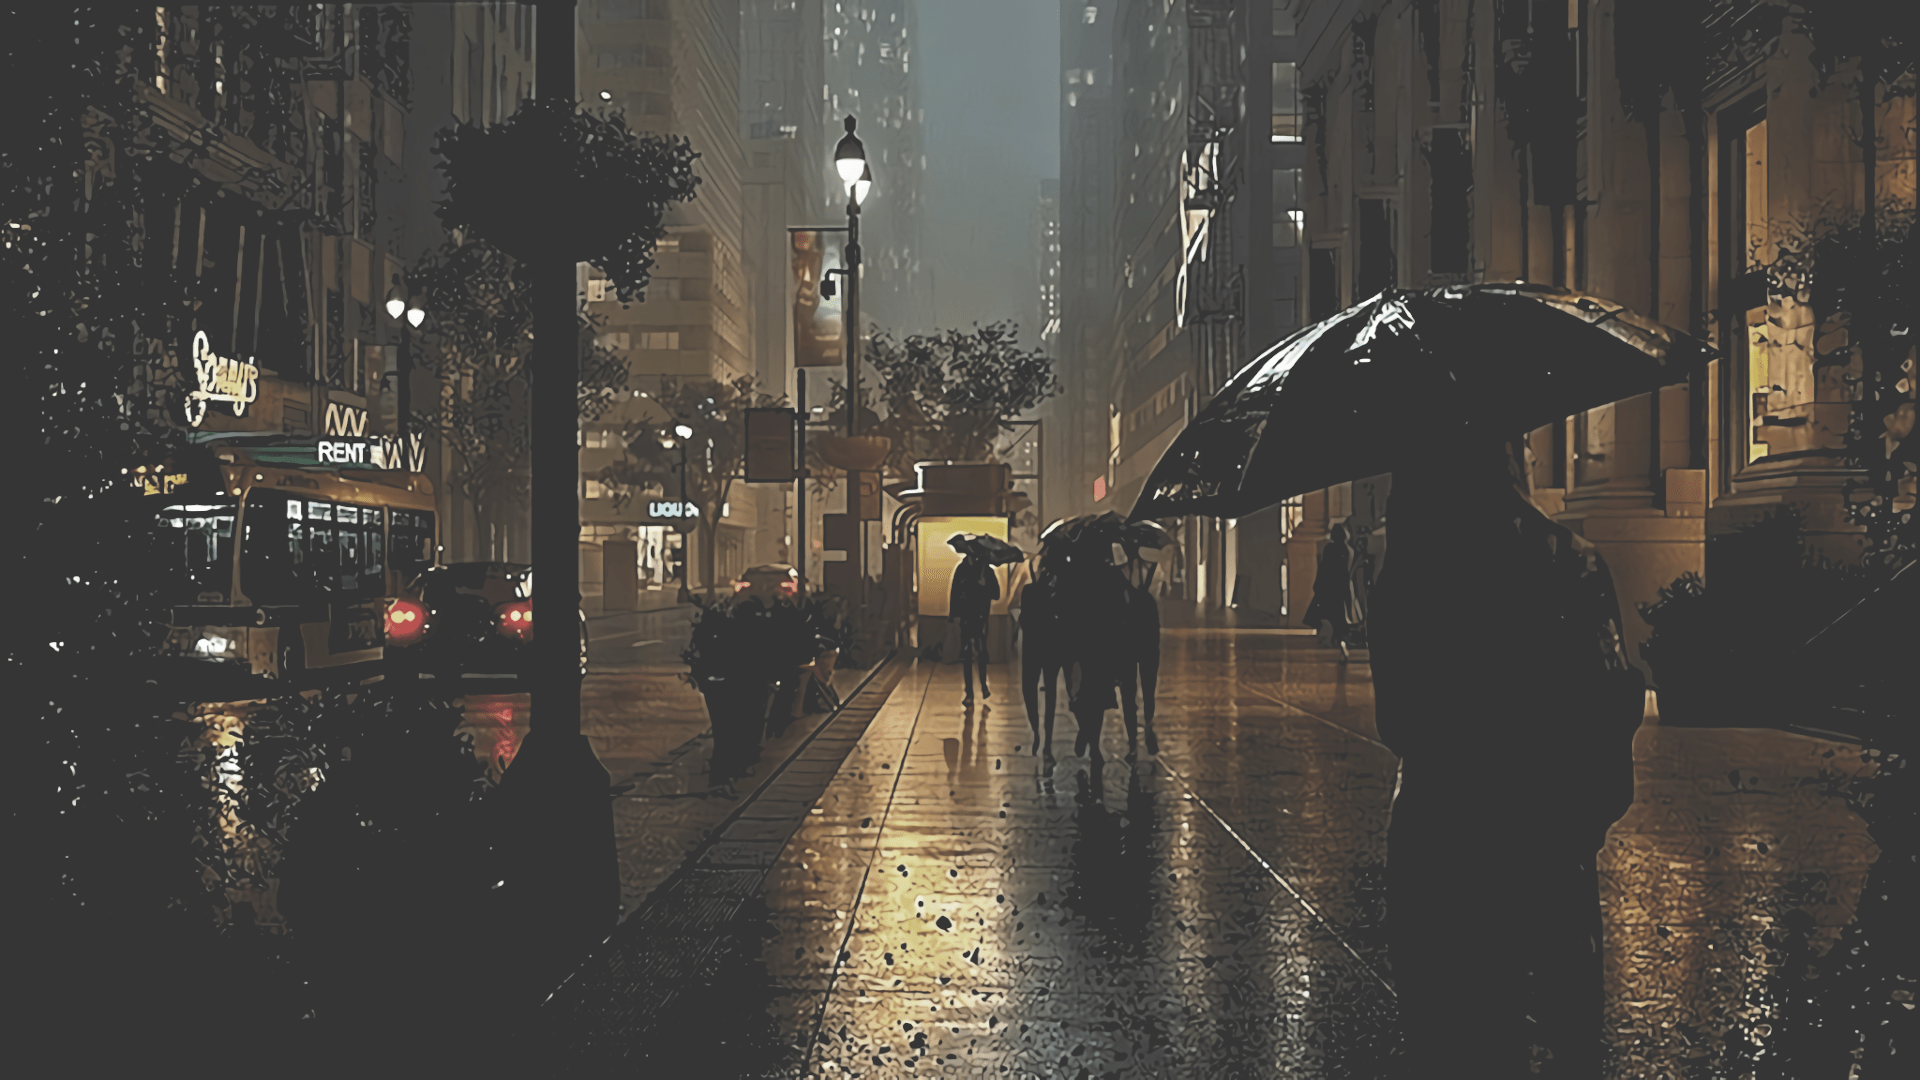 A Rainy Day. Rainy wallpaper, Cool picture for wallpaper, Landscape wallpaper